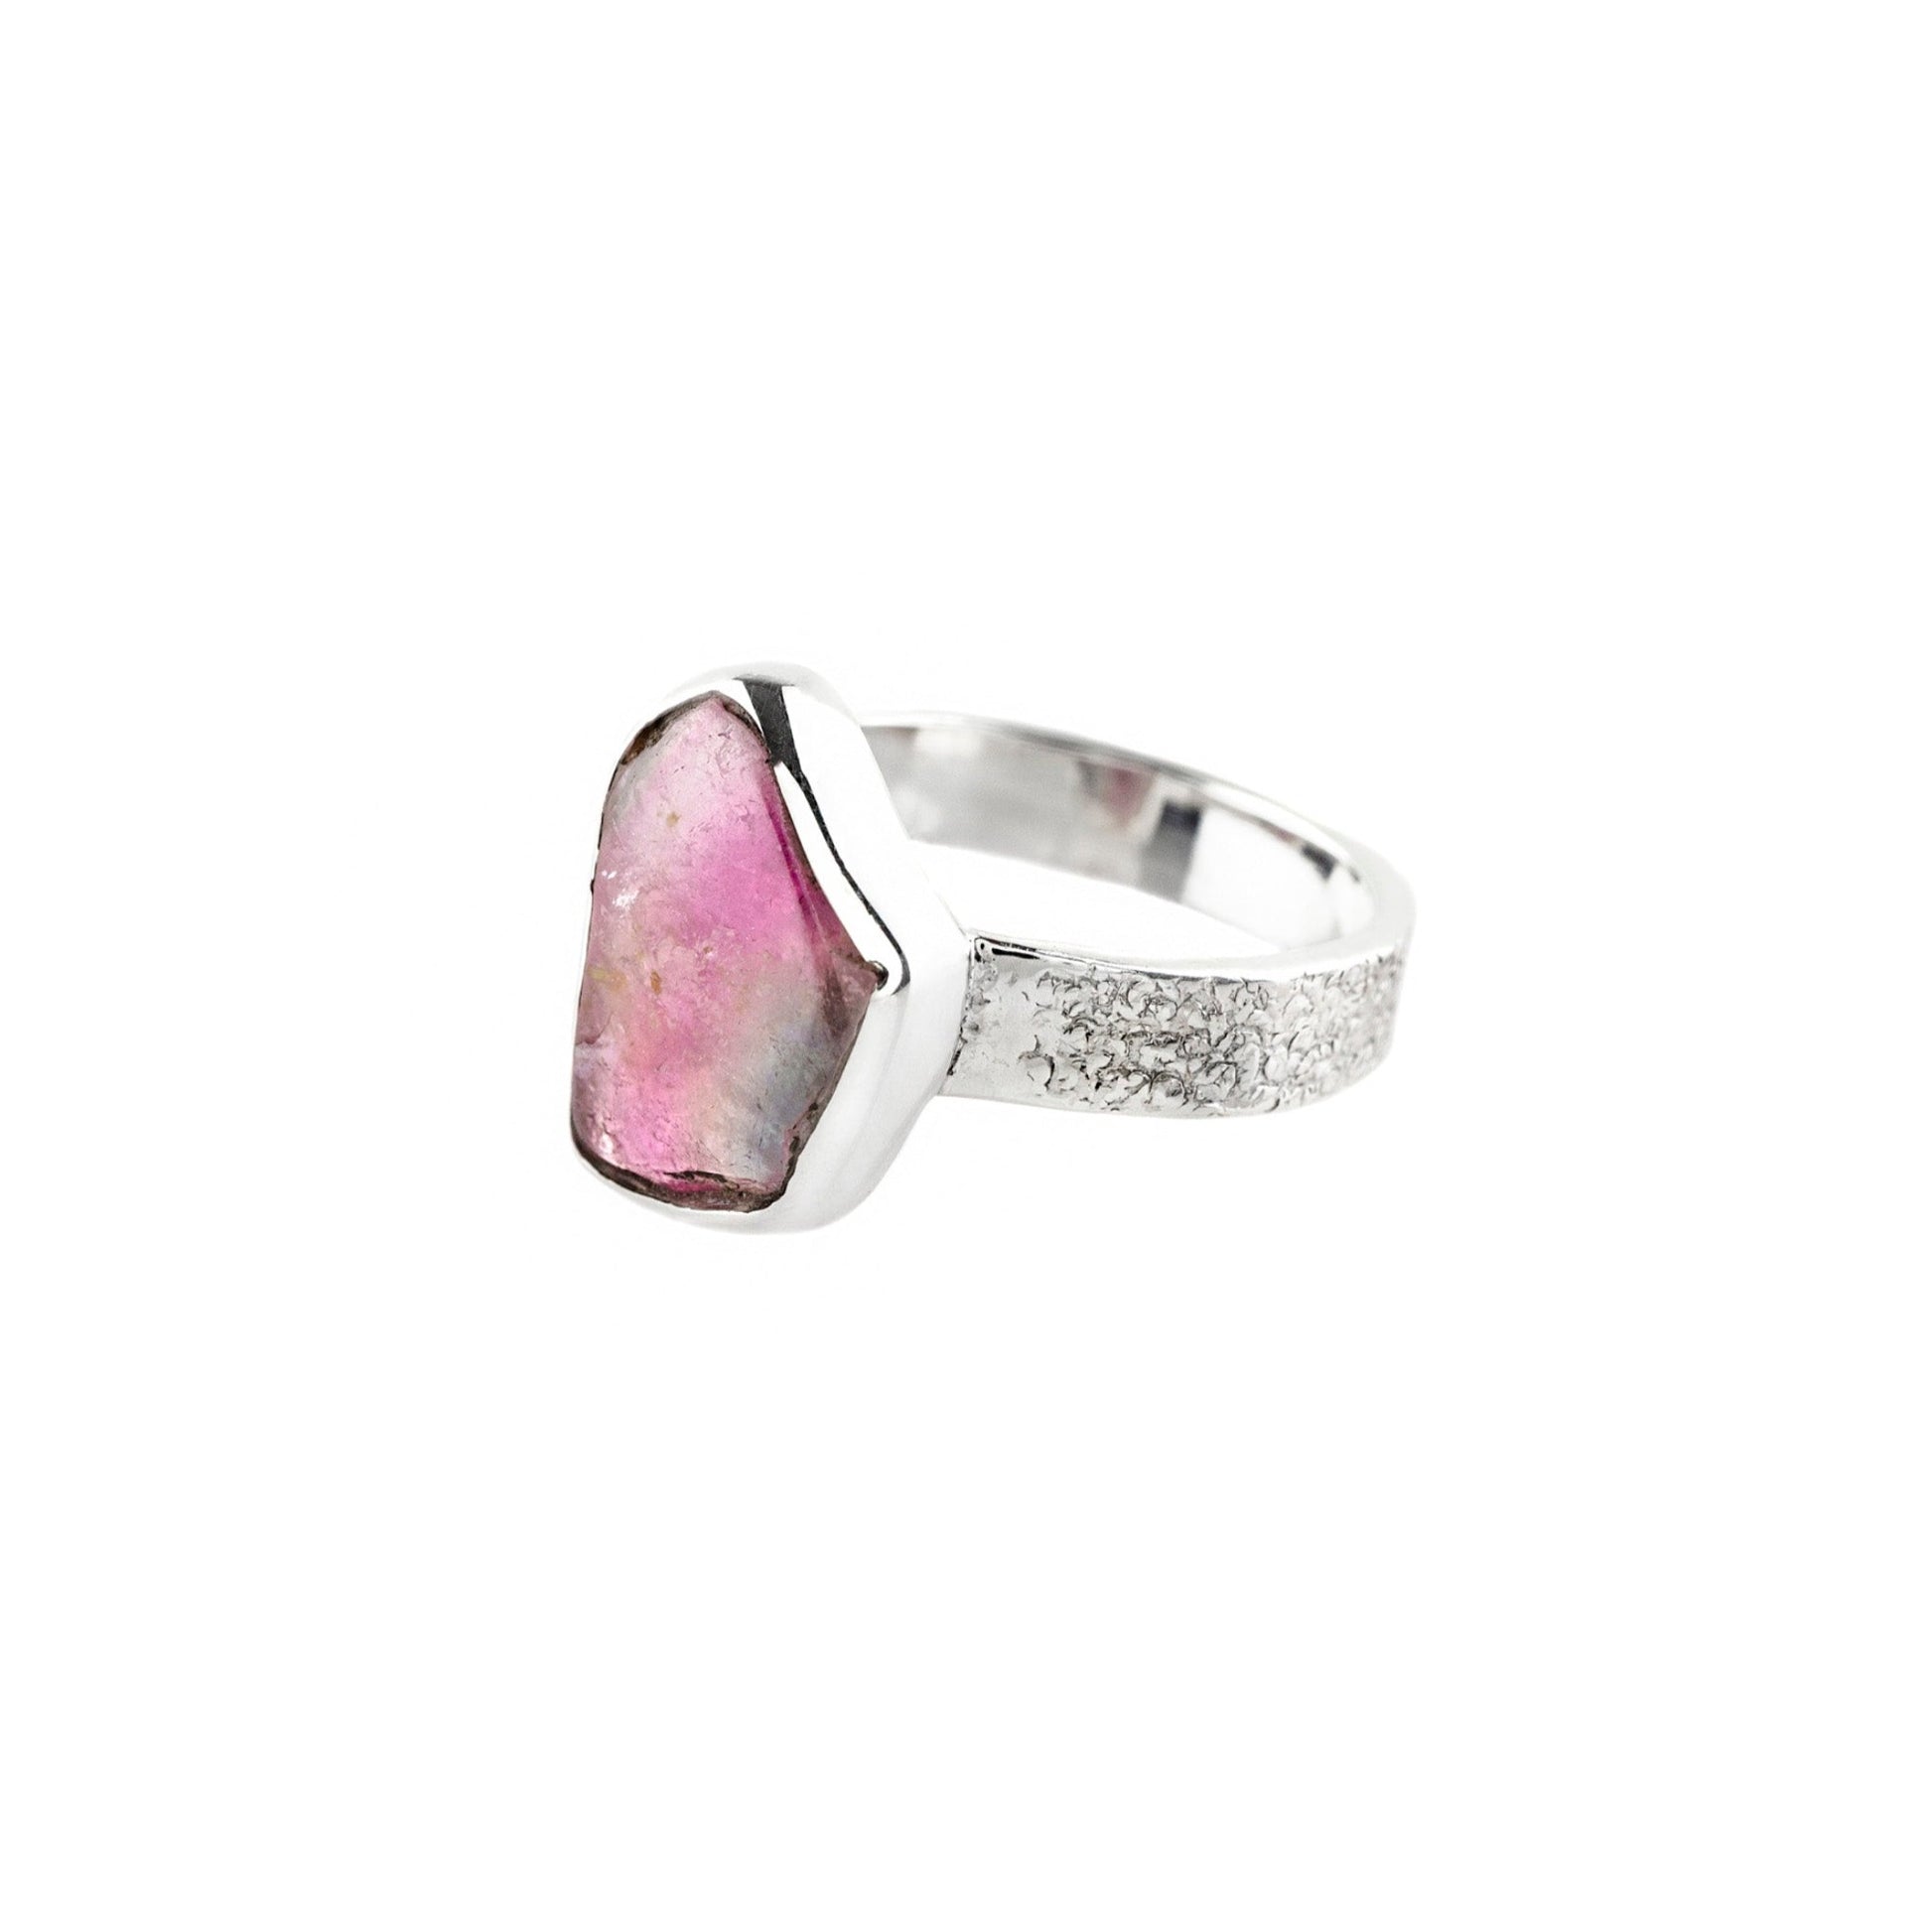 Watermelon Tourmanline Textured Sterling Silver Ring - Twisted Earth Artistry